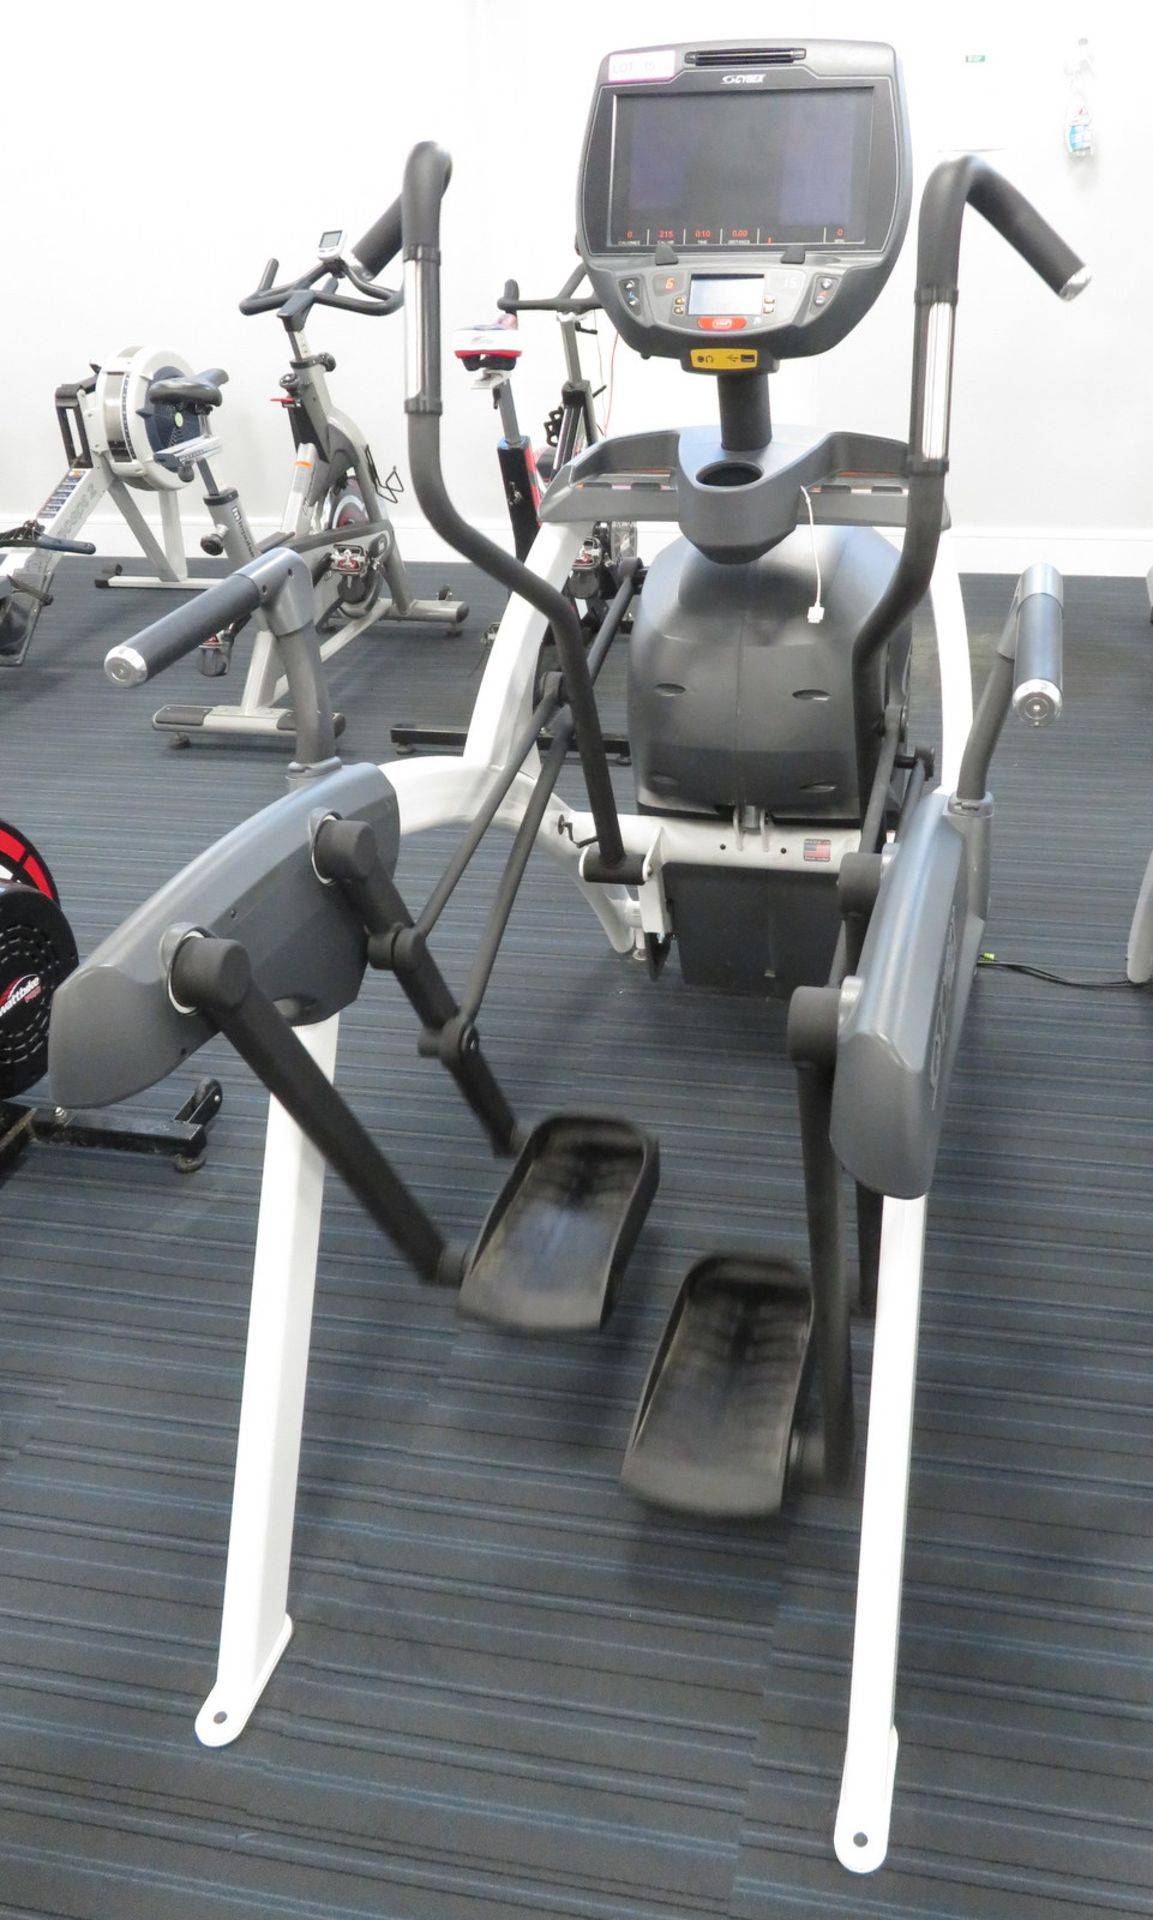 Cybex Arc Trainer Model: 772AT. Working Condition With TV Display Monitor.